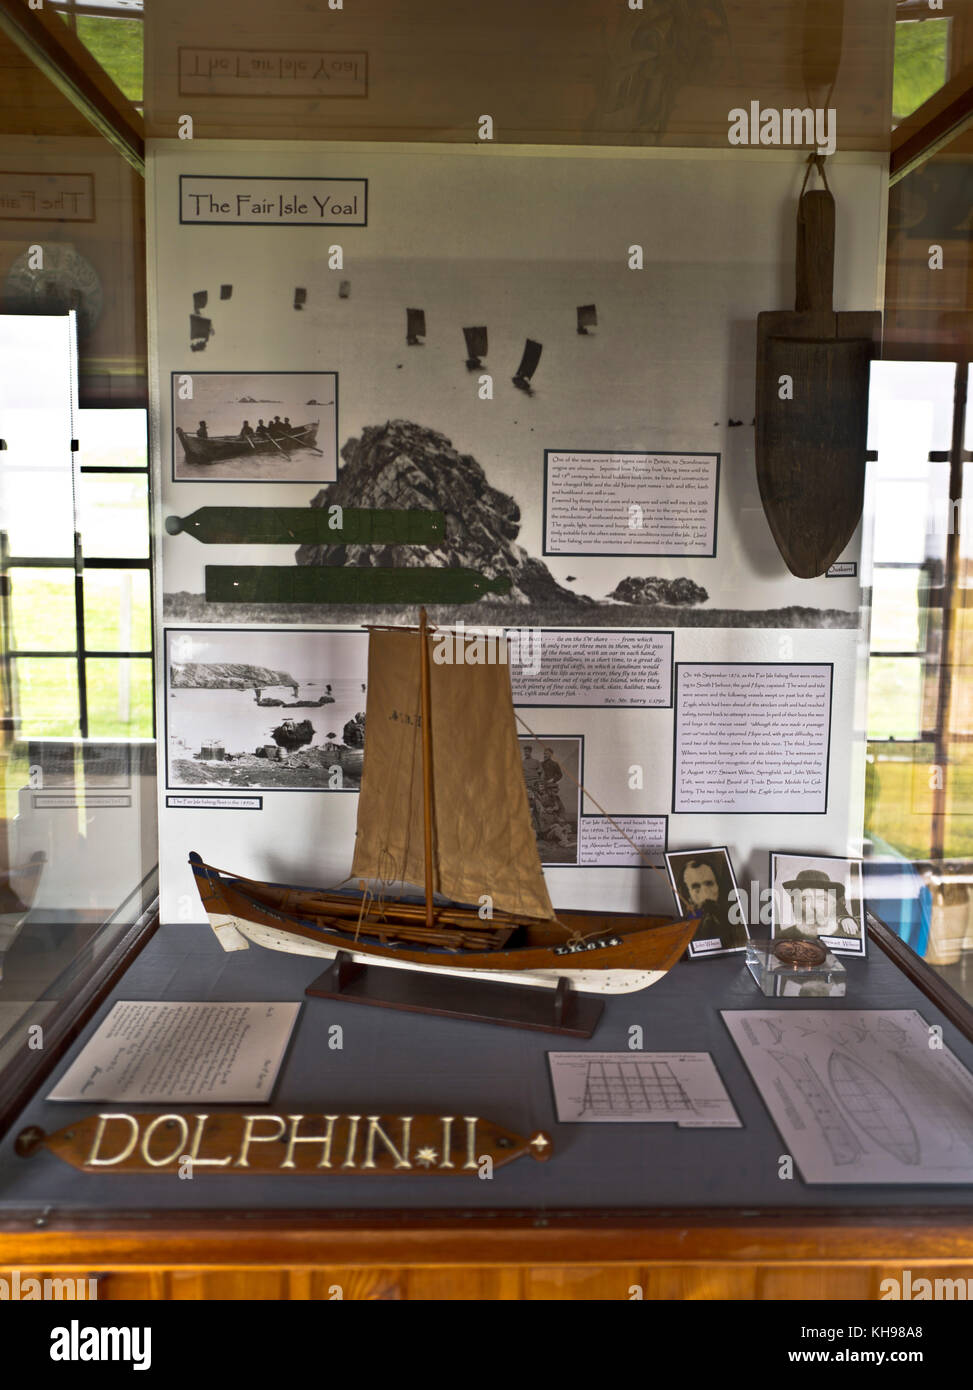 dh  MUSEUM FAIR ISLE George Waterson Memorial Centre Yoal boat display exhibit museums exhibition scotland Stock Photo